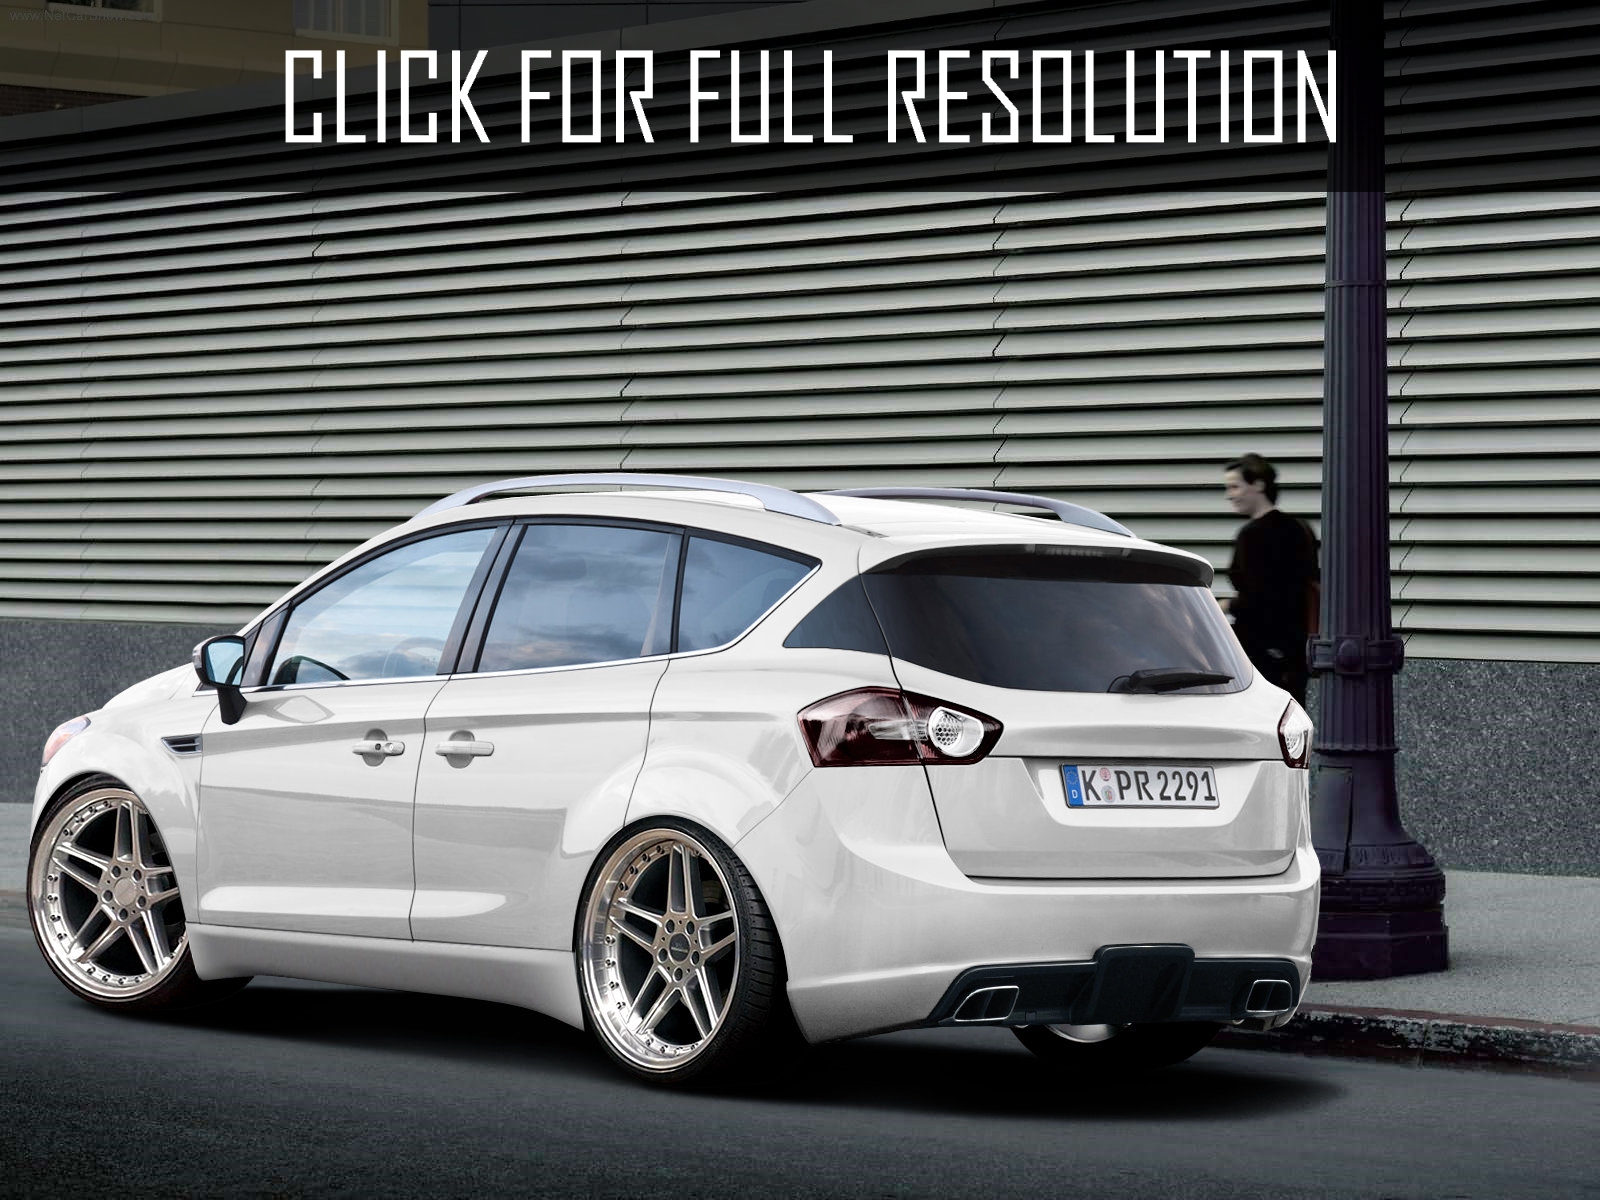 Ford Kuga Modified - amazing photo gallery, some information and